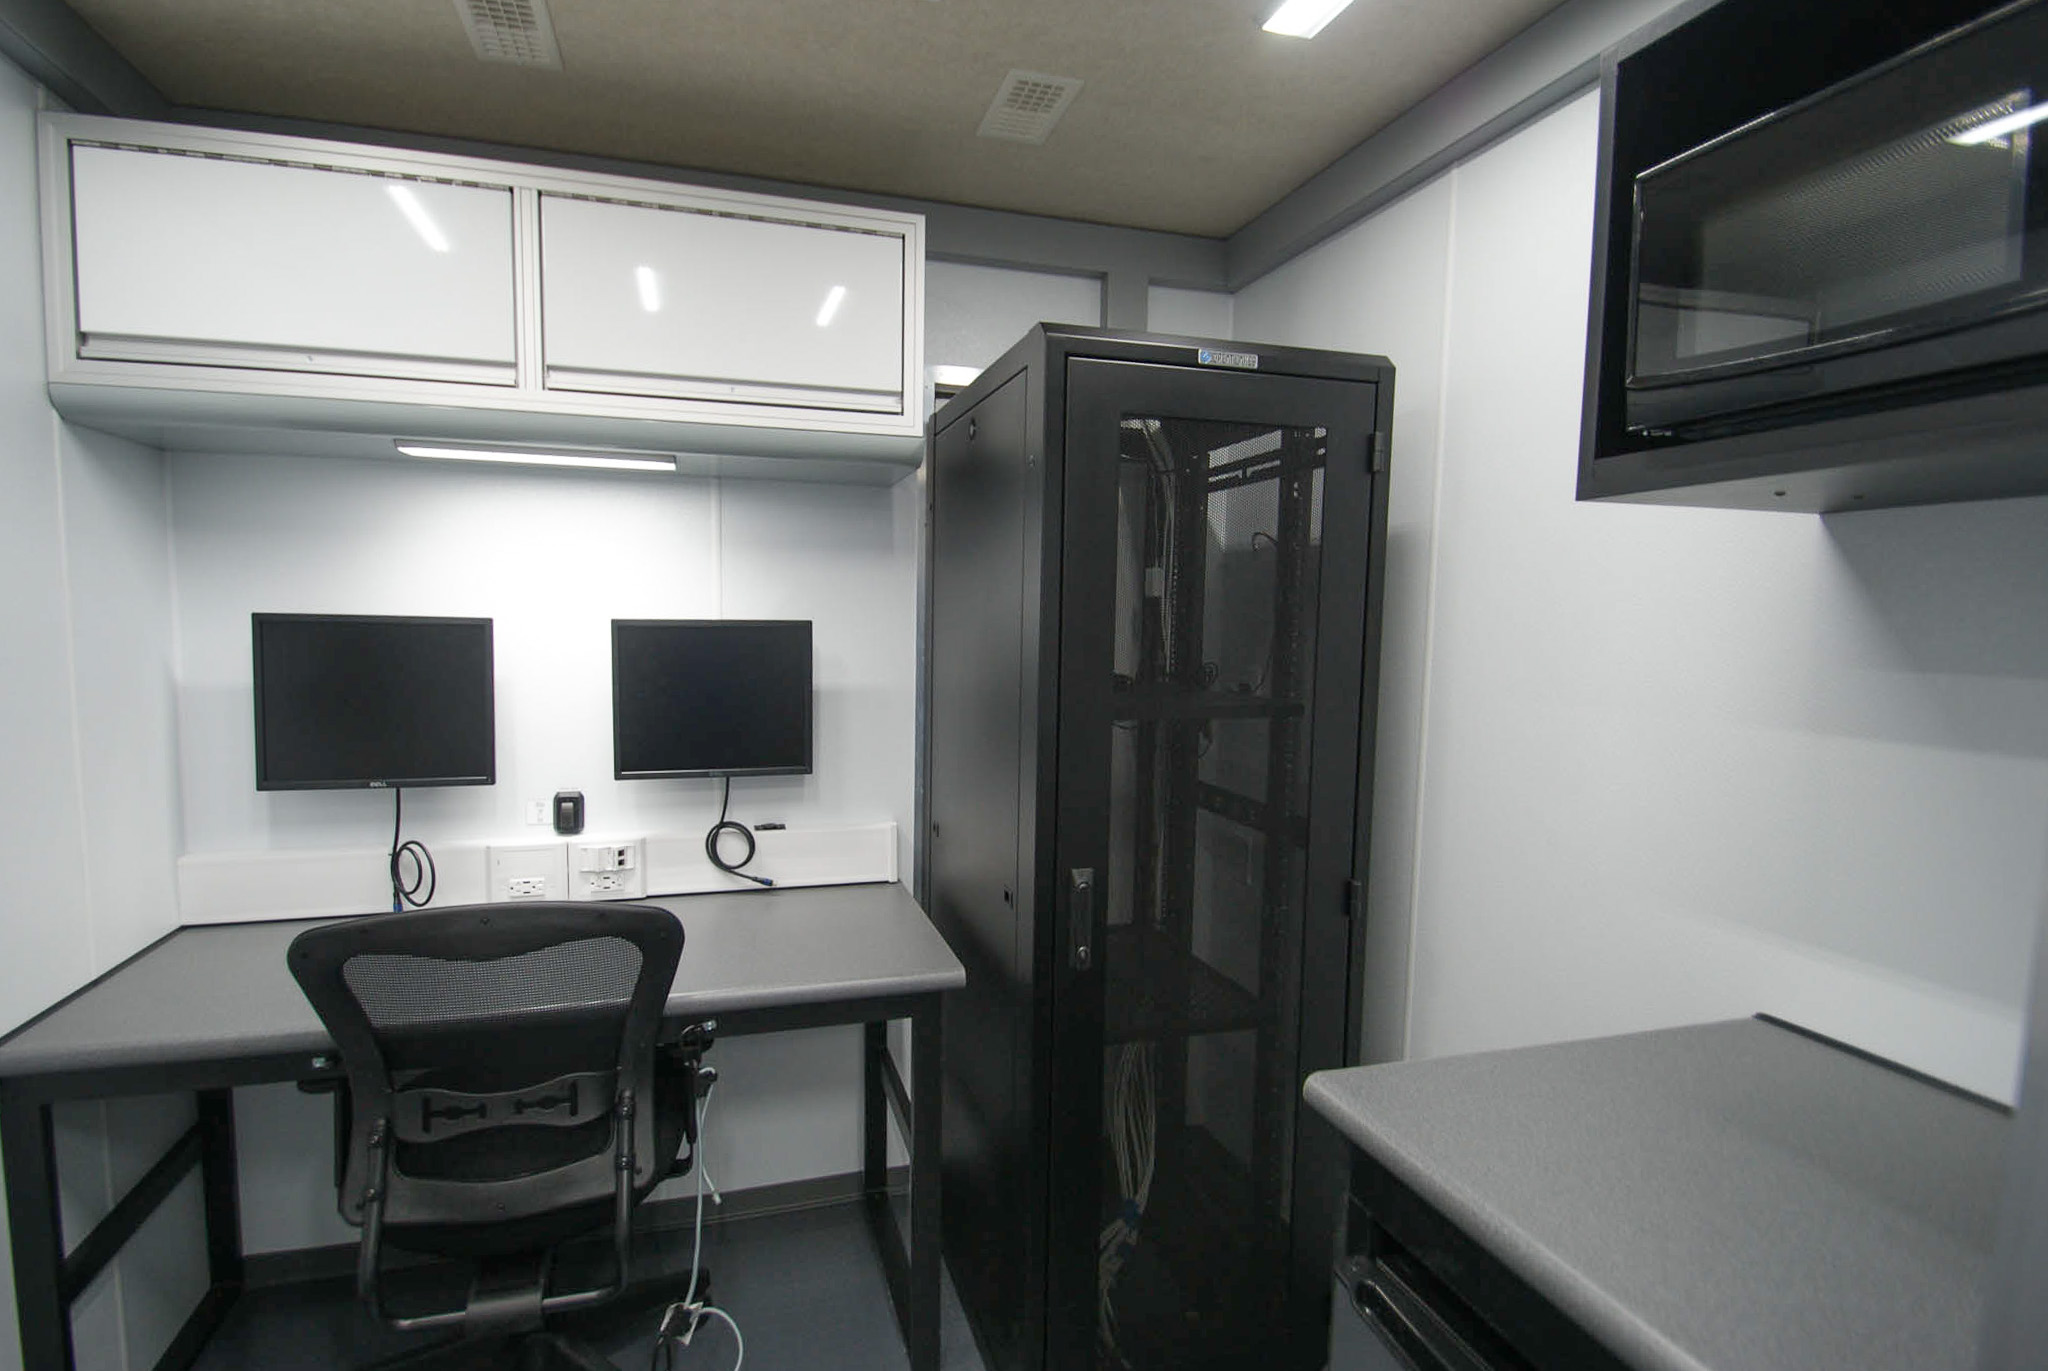 A view of a workstation, kitchenette, and electronics rack cabinet inside the unit for Delhi, NY.